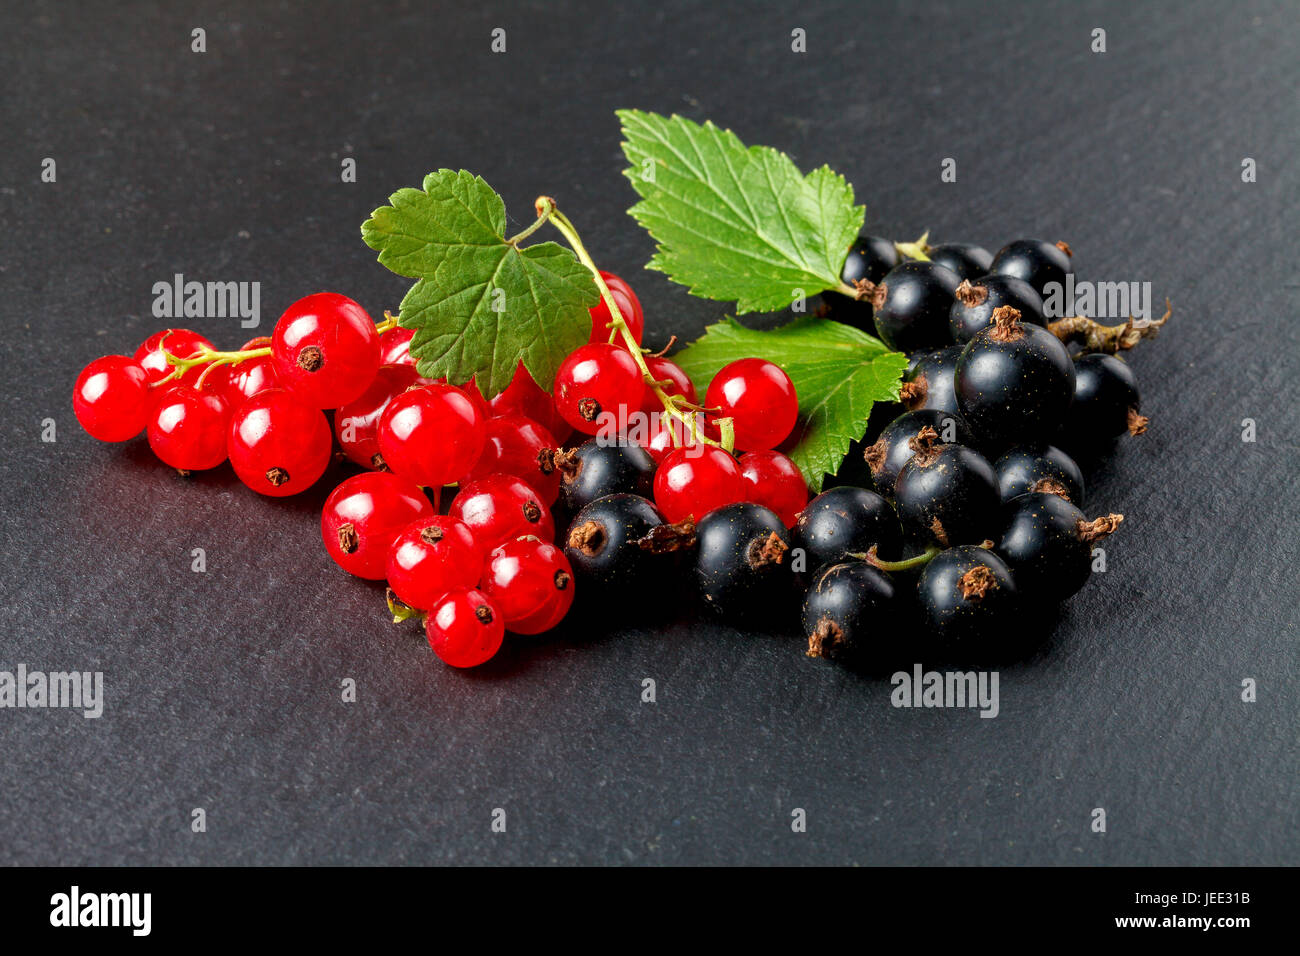 Black and red currants on a dark background, close-up Stock Photo